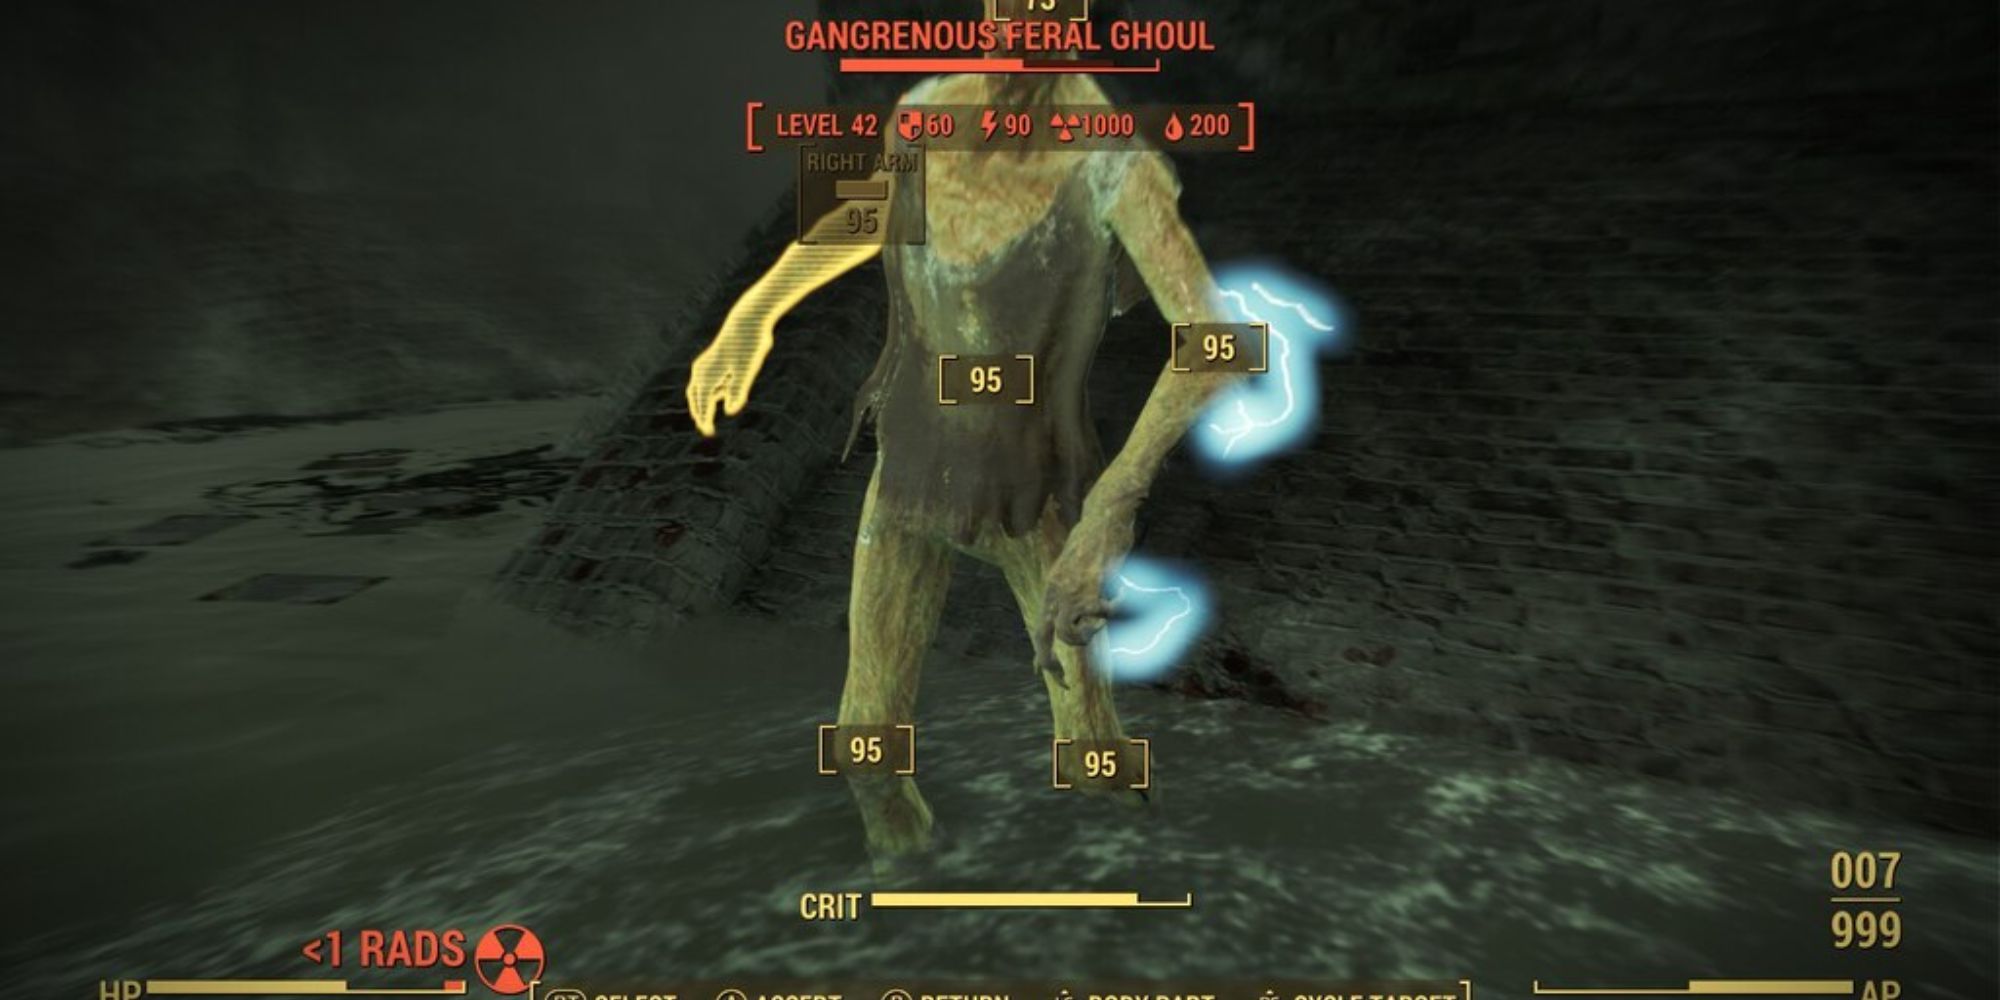 Fallout 4 Gangrenous Feral Ghoul